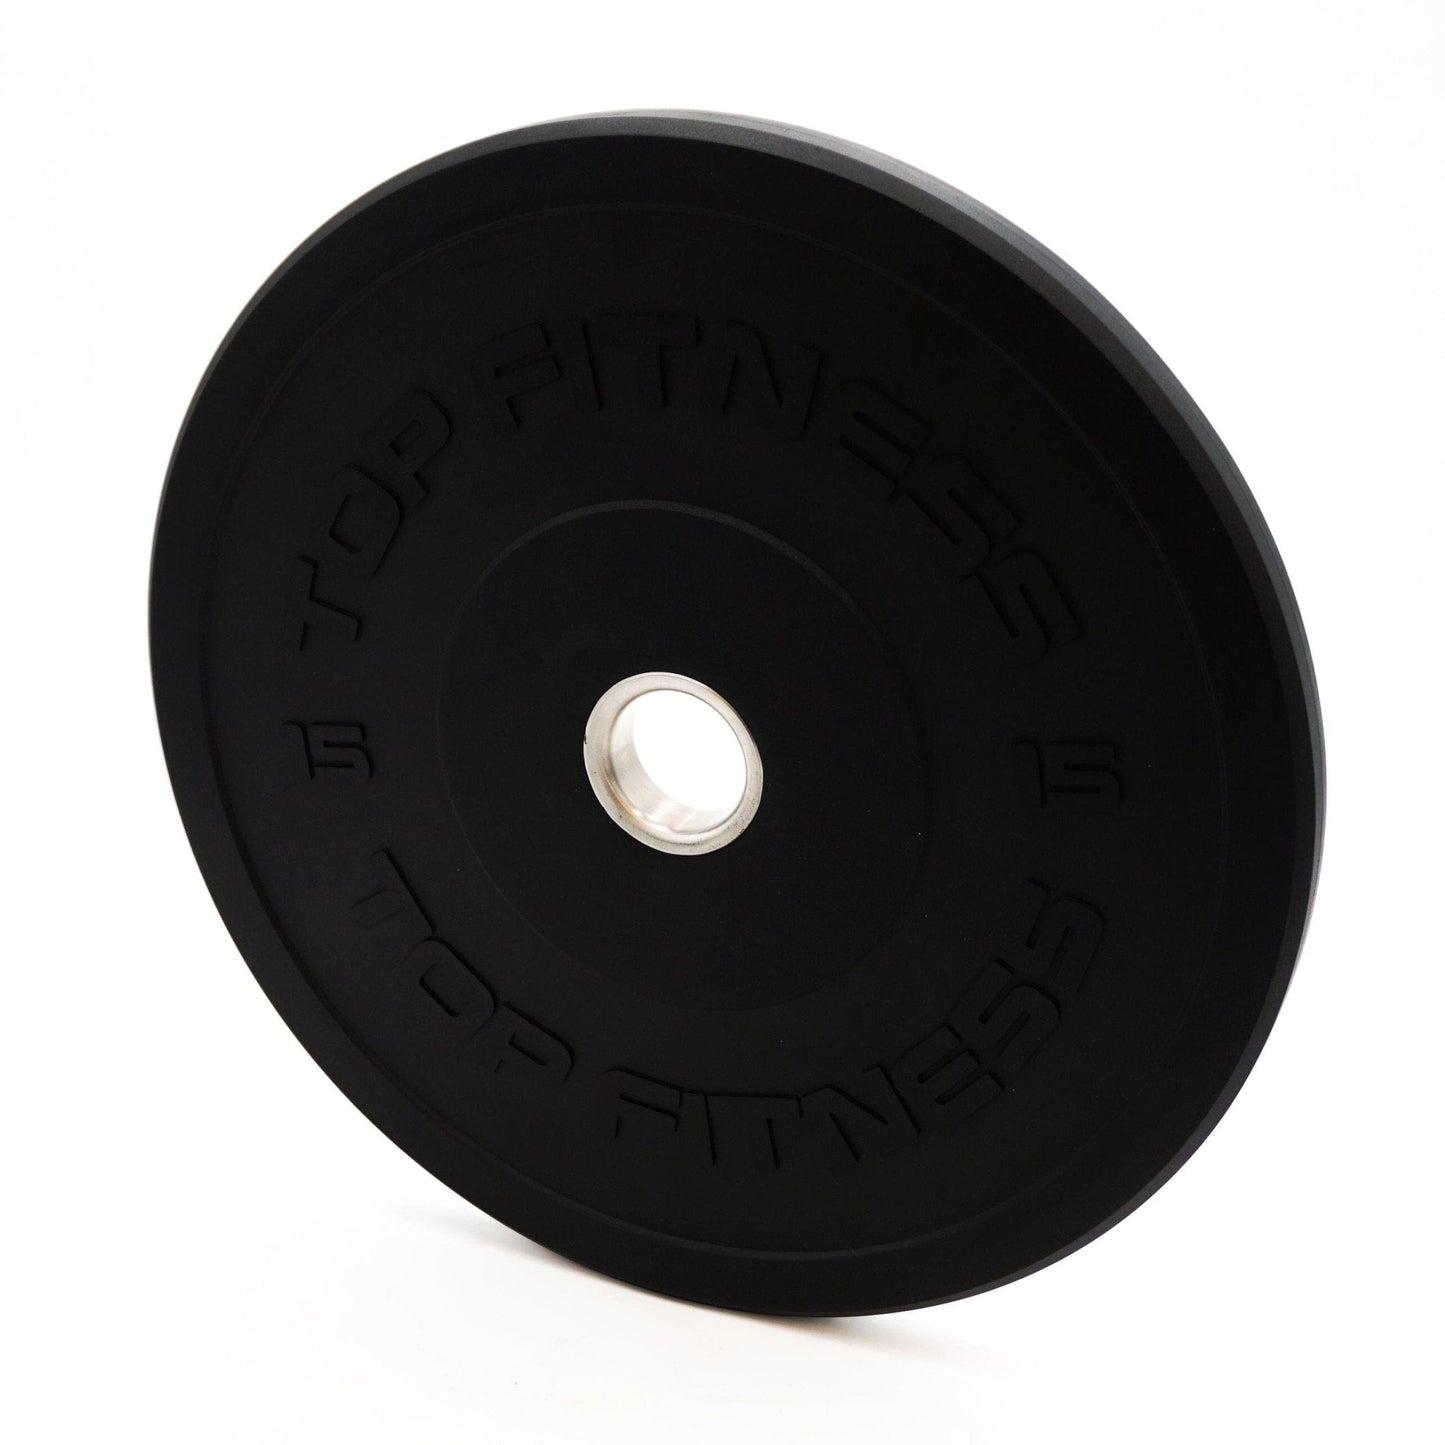 Top Fitness Olympic Bumper Plate Weight Plates Top Fitness 15LB